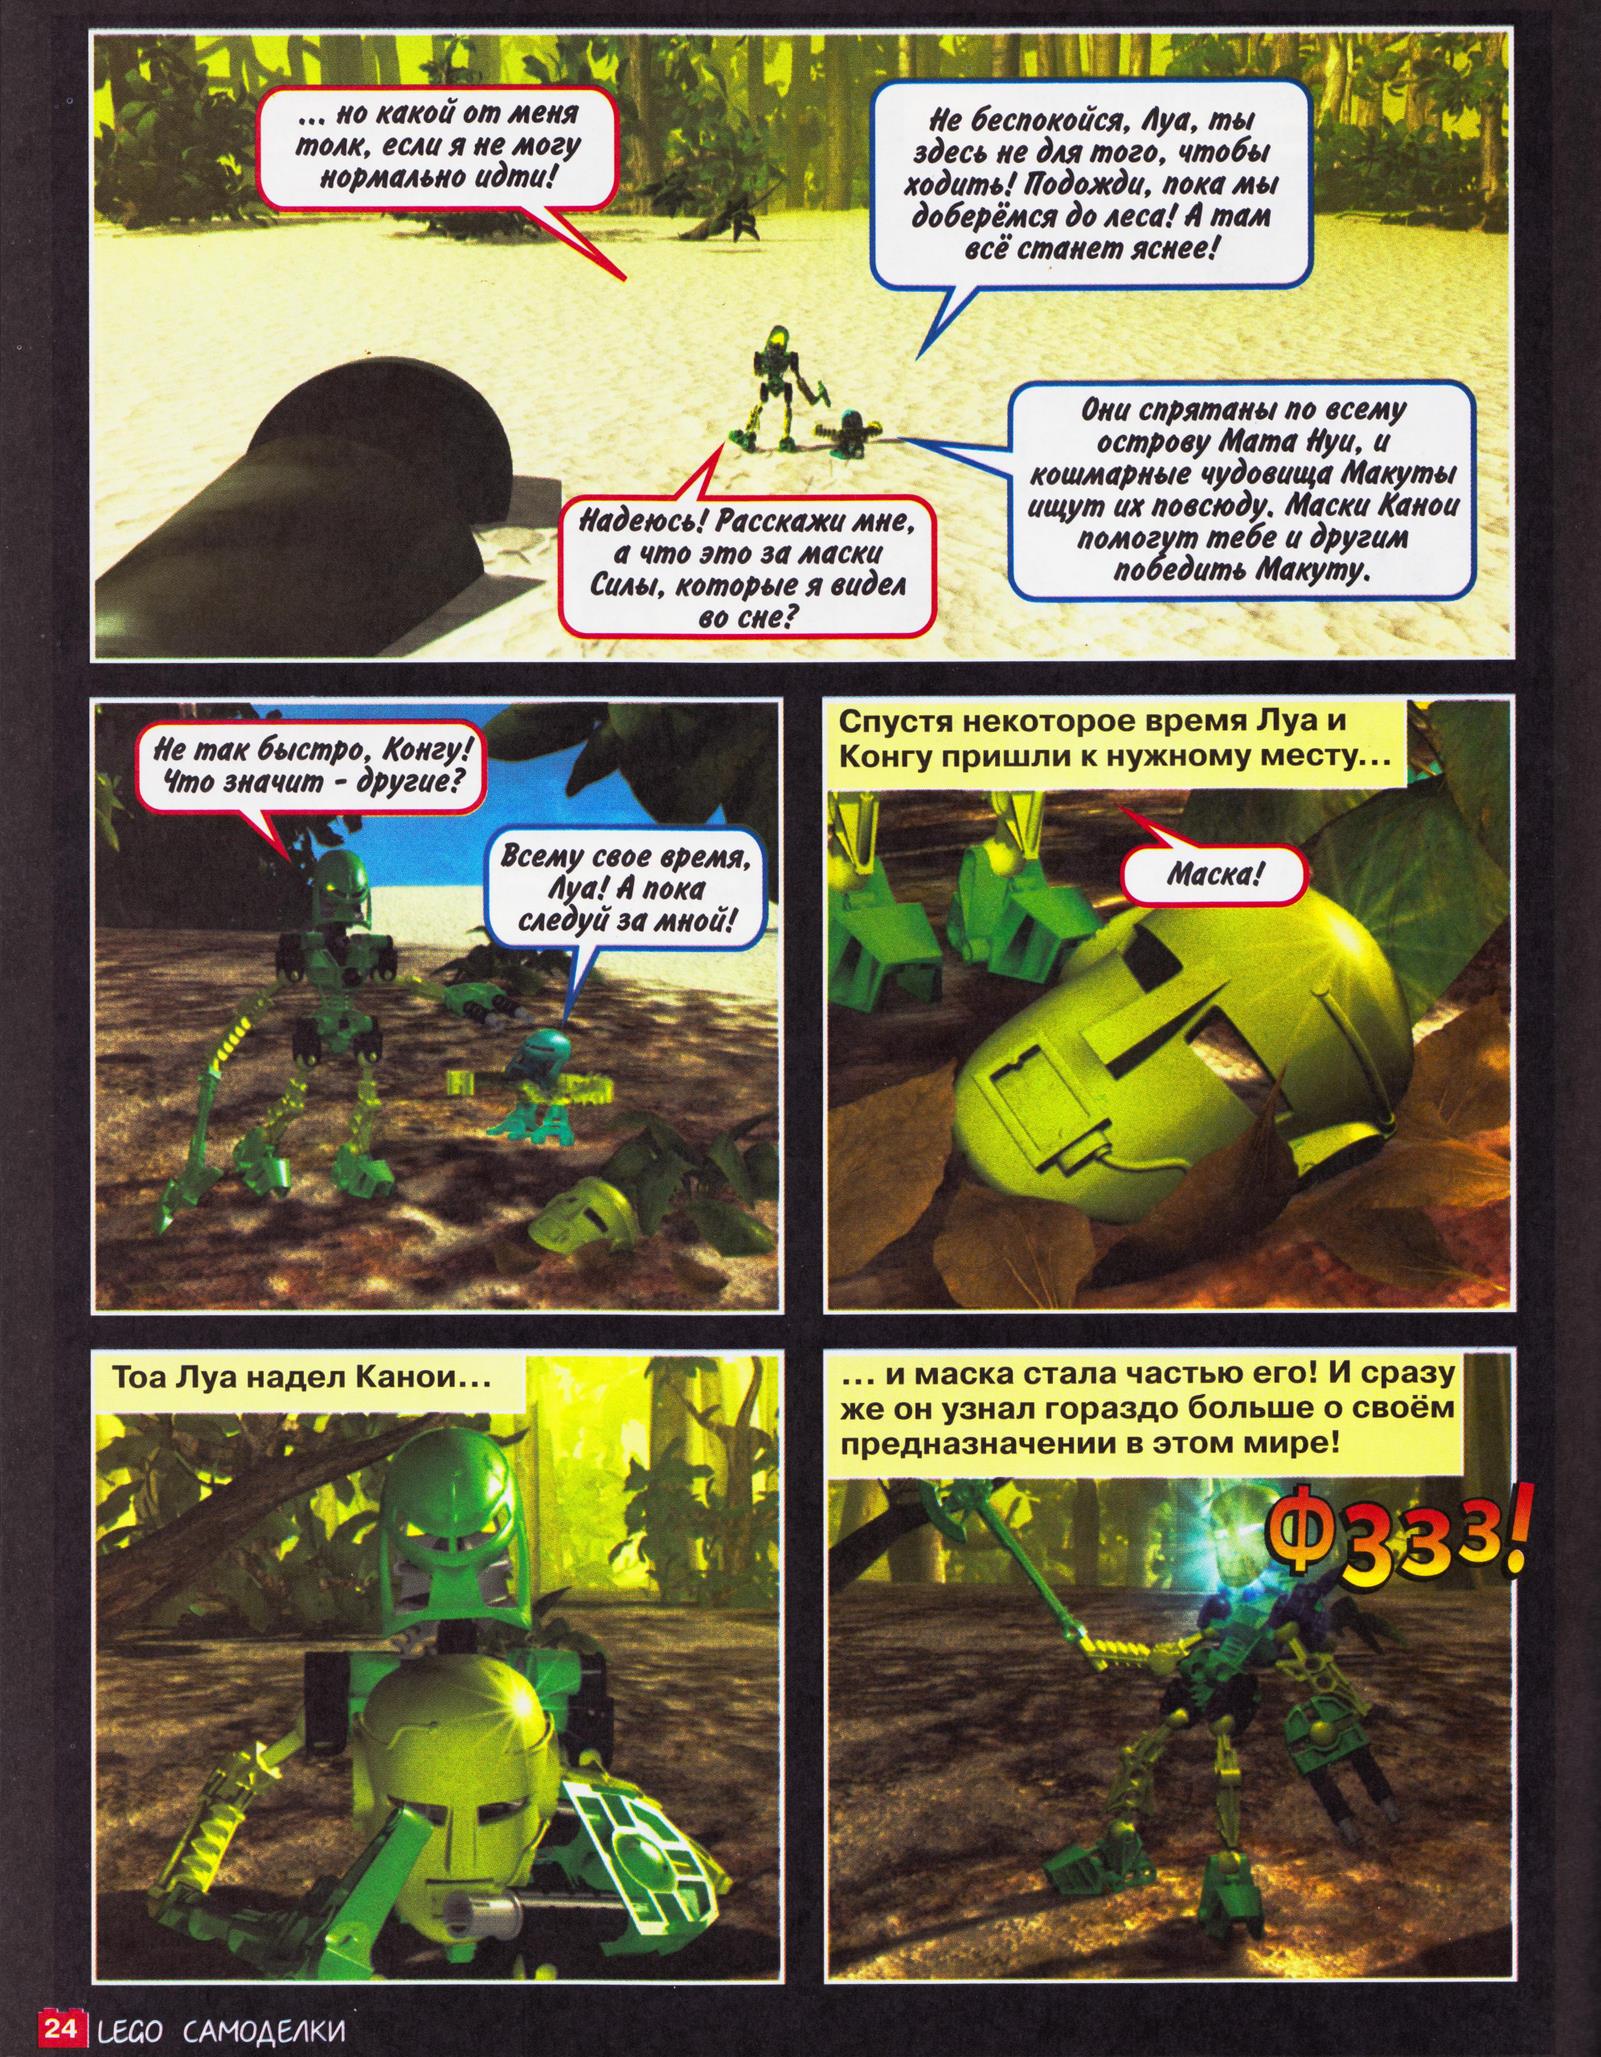 http://biosector01.com/wiki/images/6/62/The_Legend_of_Lewa_Part_One_Page_Three.jpg